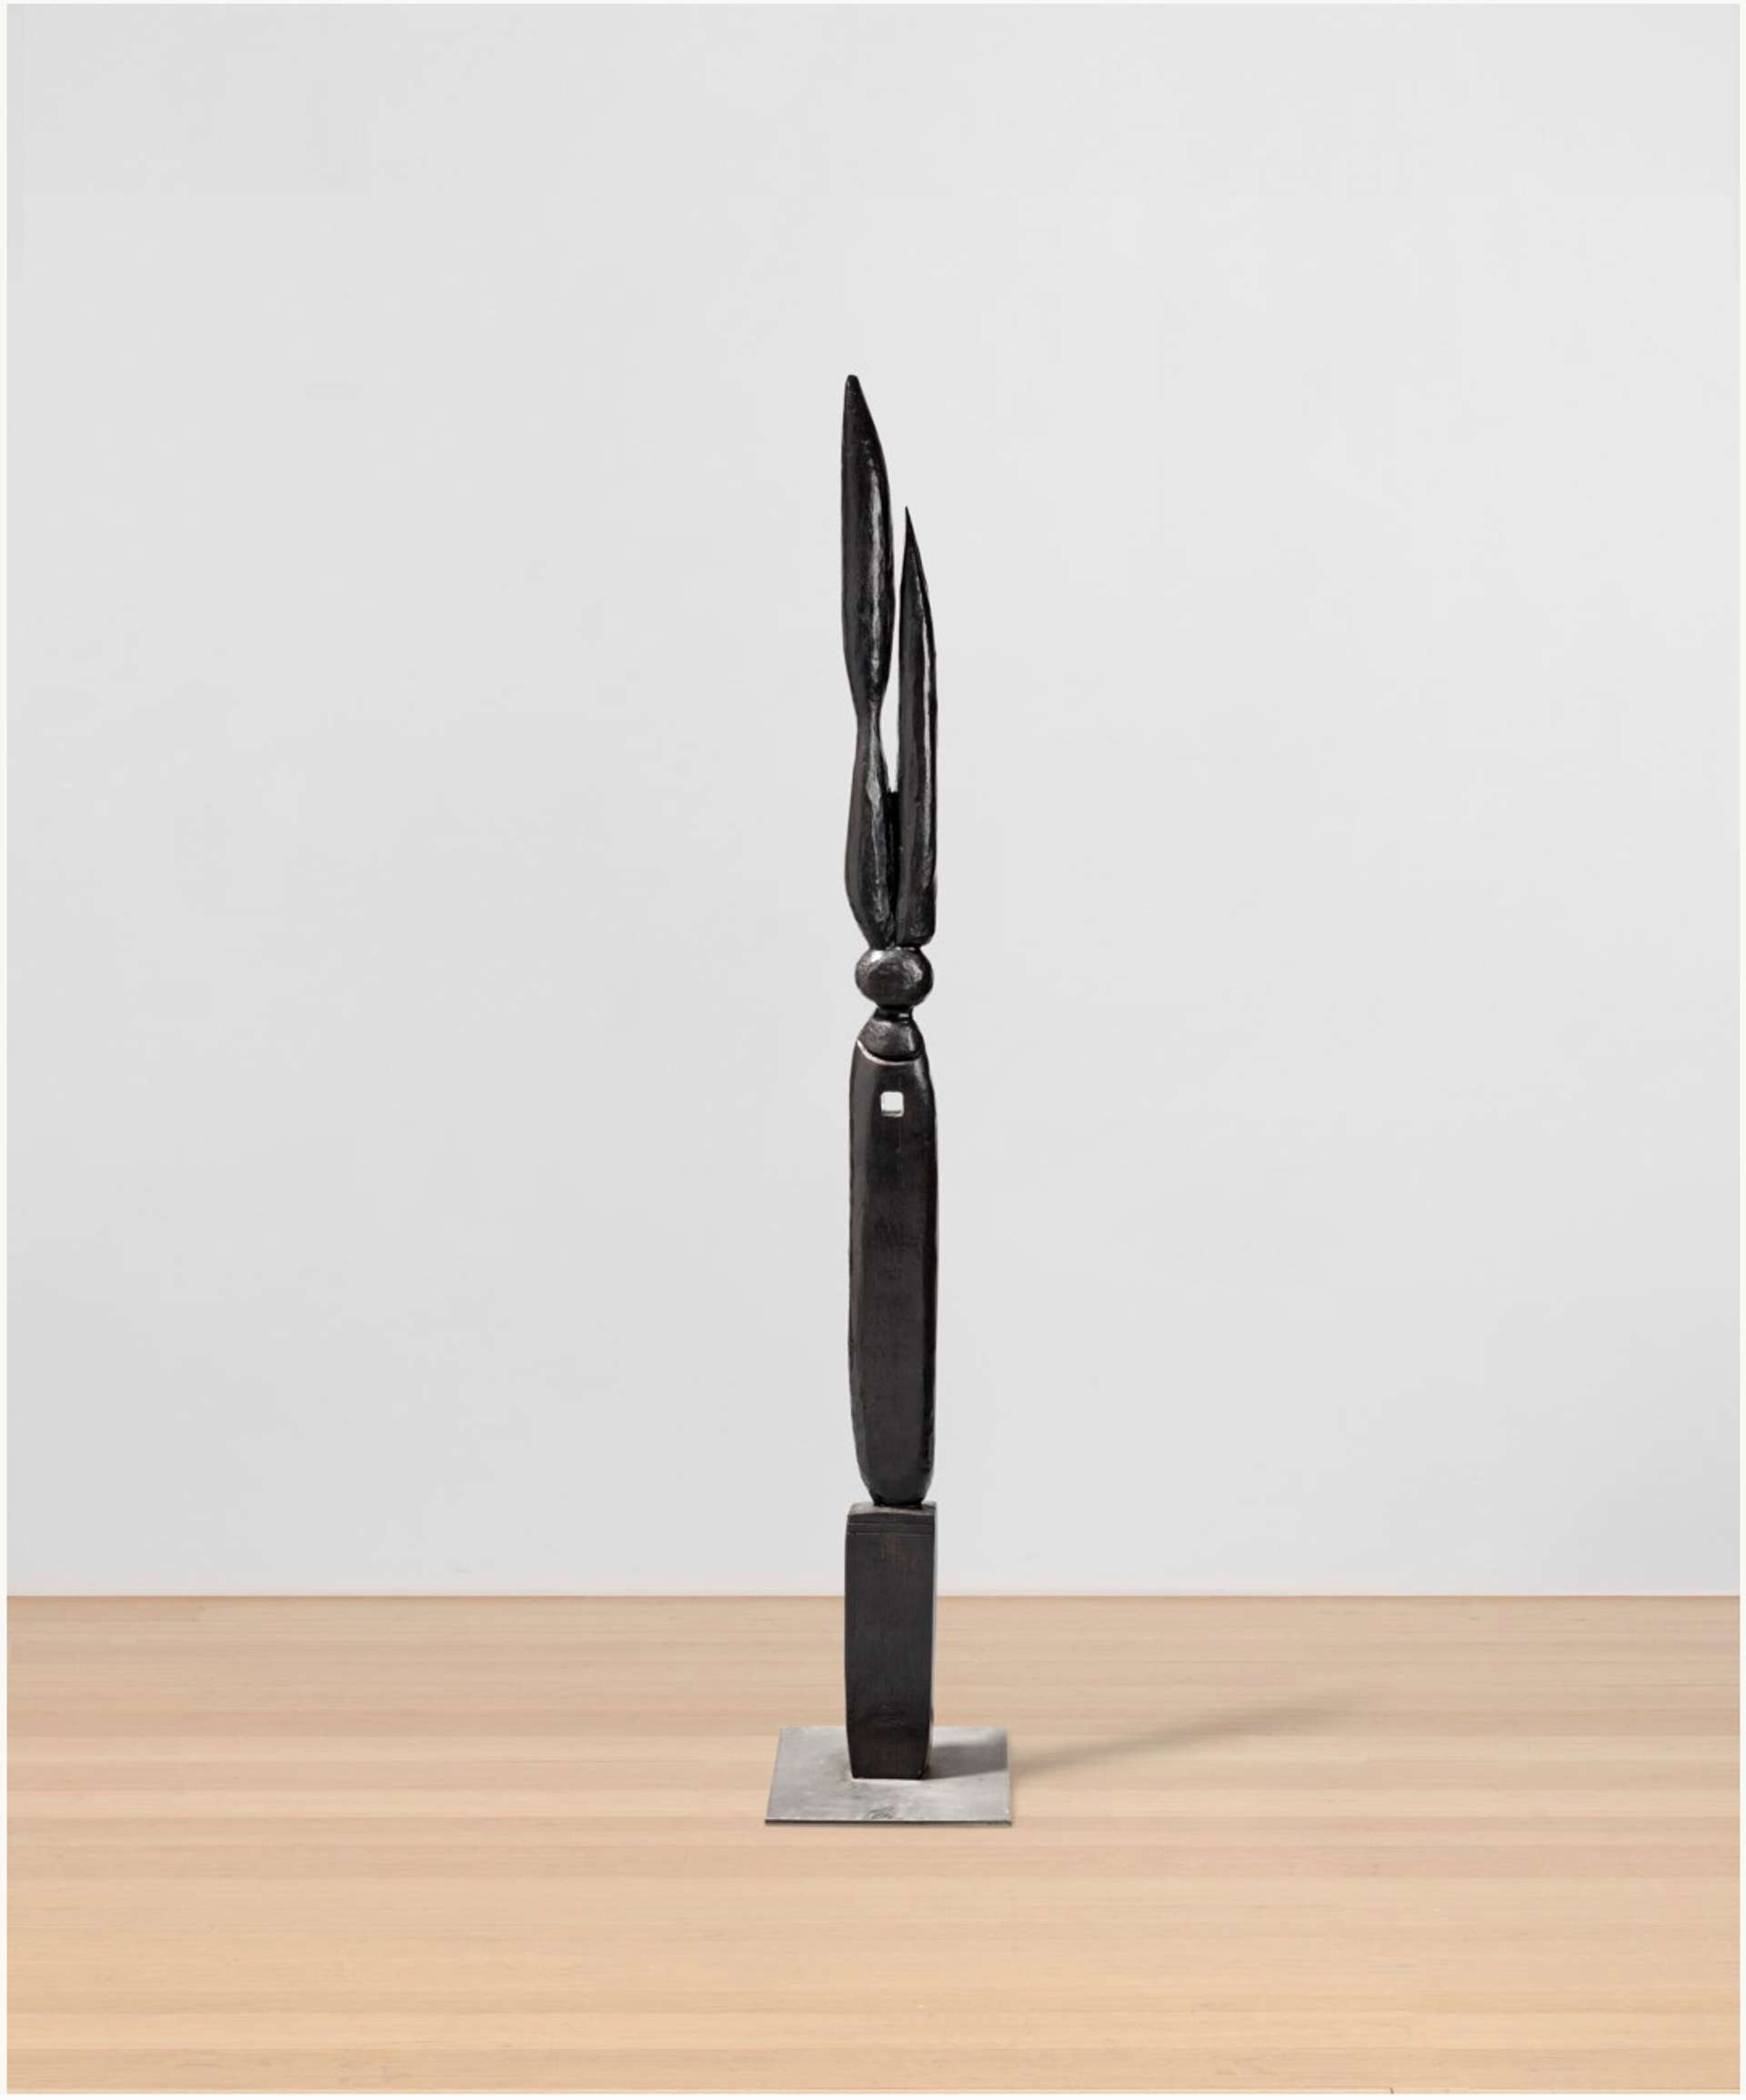 A black sculpture resembling a tall, skinny candle with three distinct parts. At the base, a sturdy foundation; in the middle, a slender column; and at the top, a flame-like structure. The sculpture evokes the image of a burning black candle.